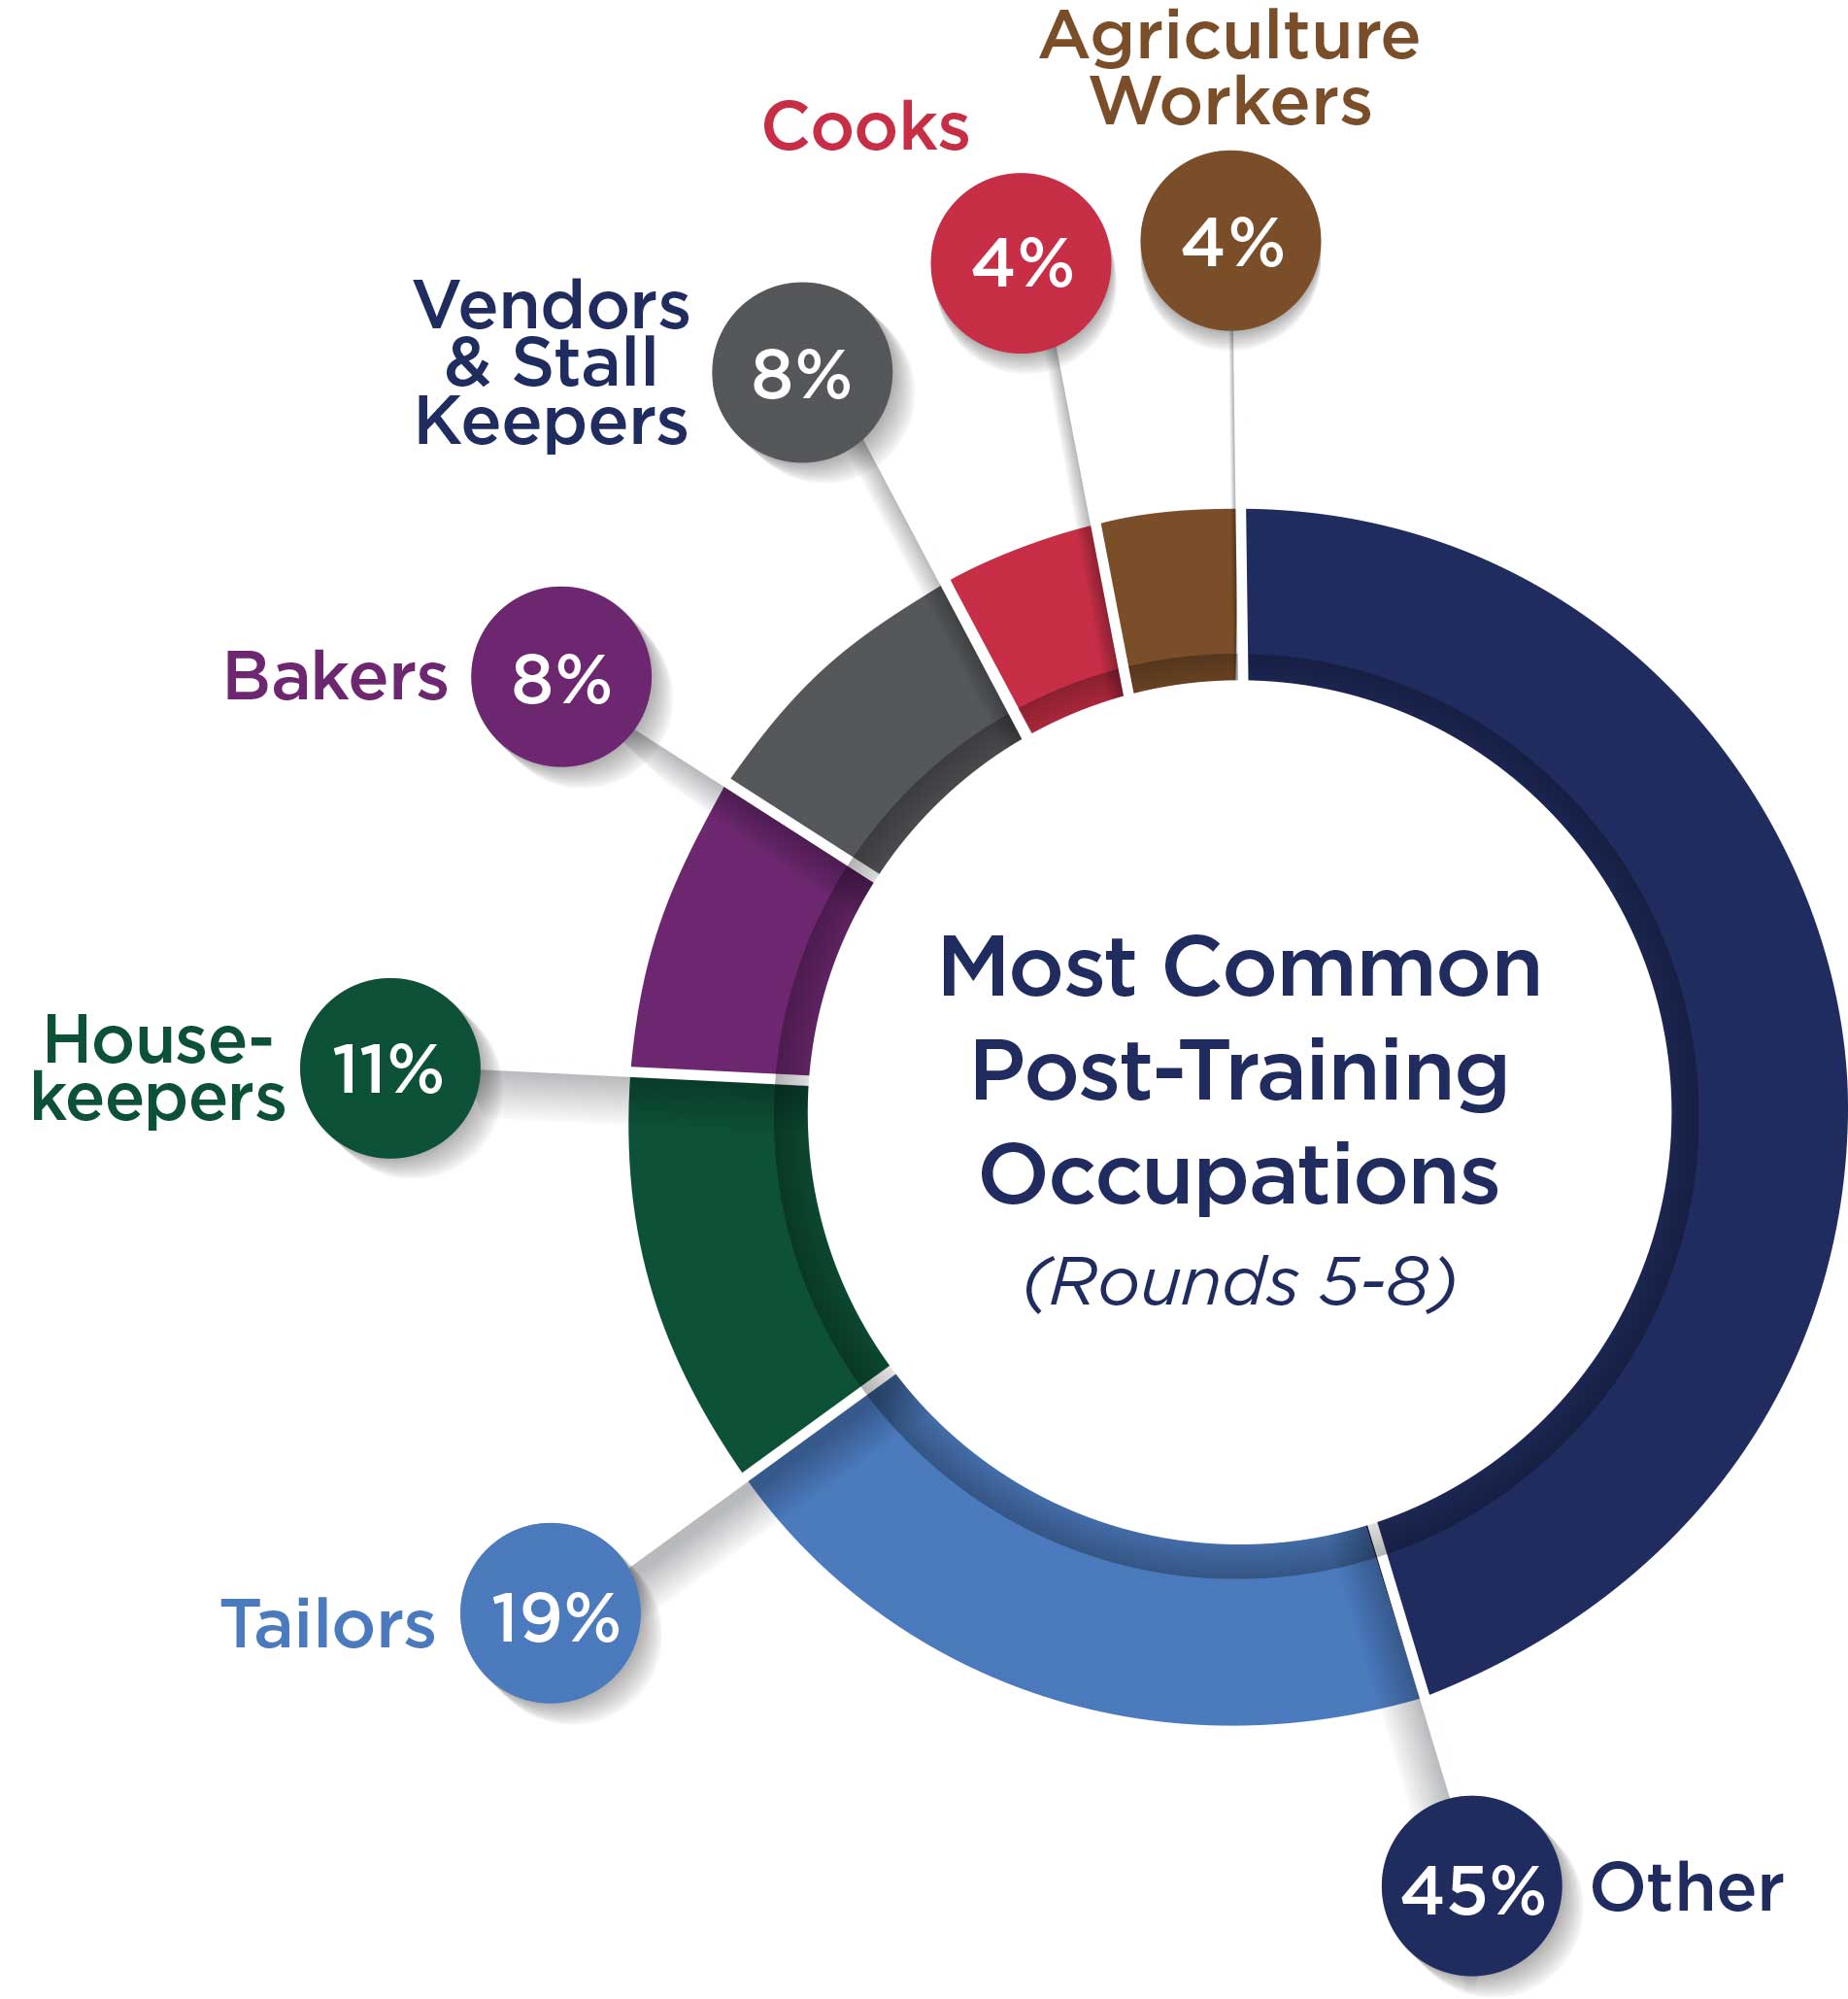 Most Common Post-Training Occupations